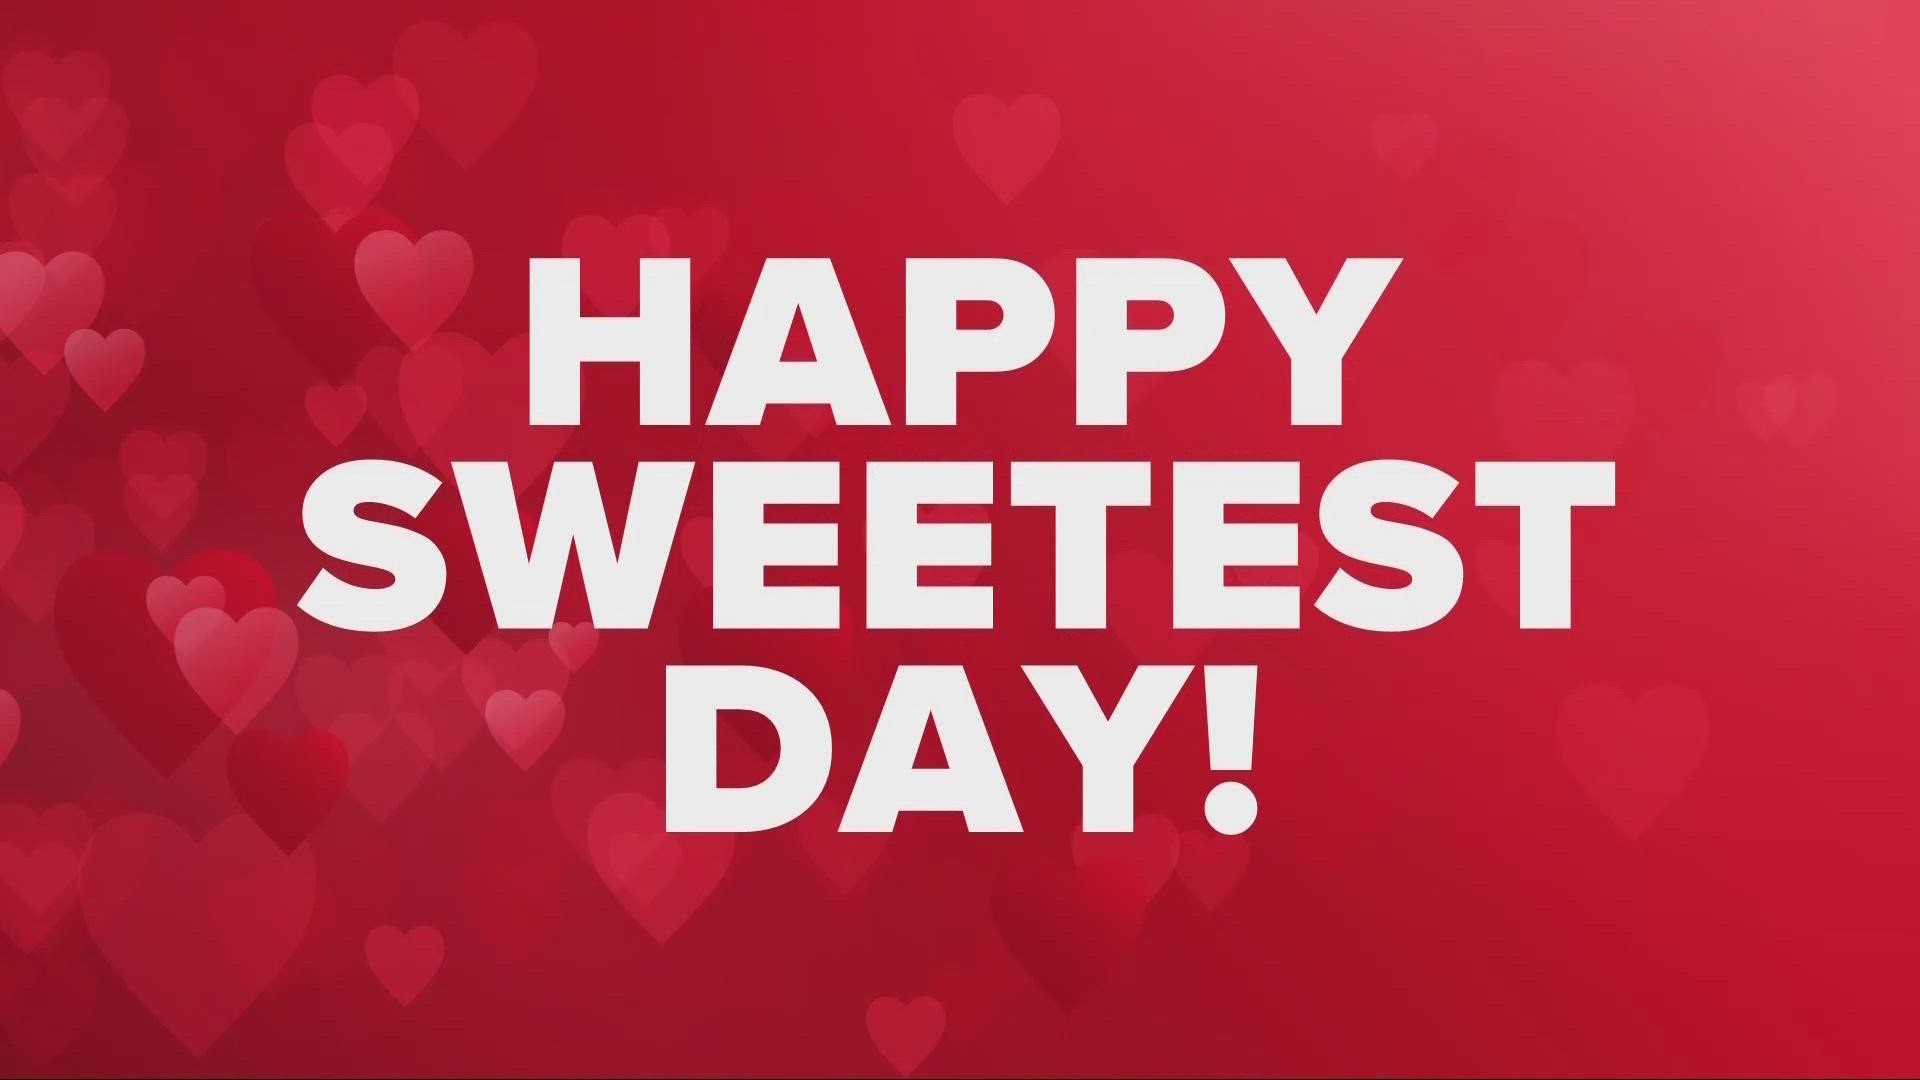 Mike Polk Jr. on the Cleveland origins of Sweetest Day